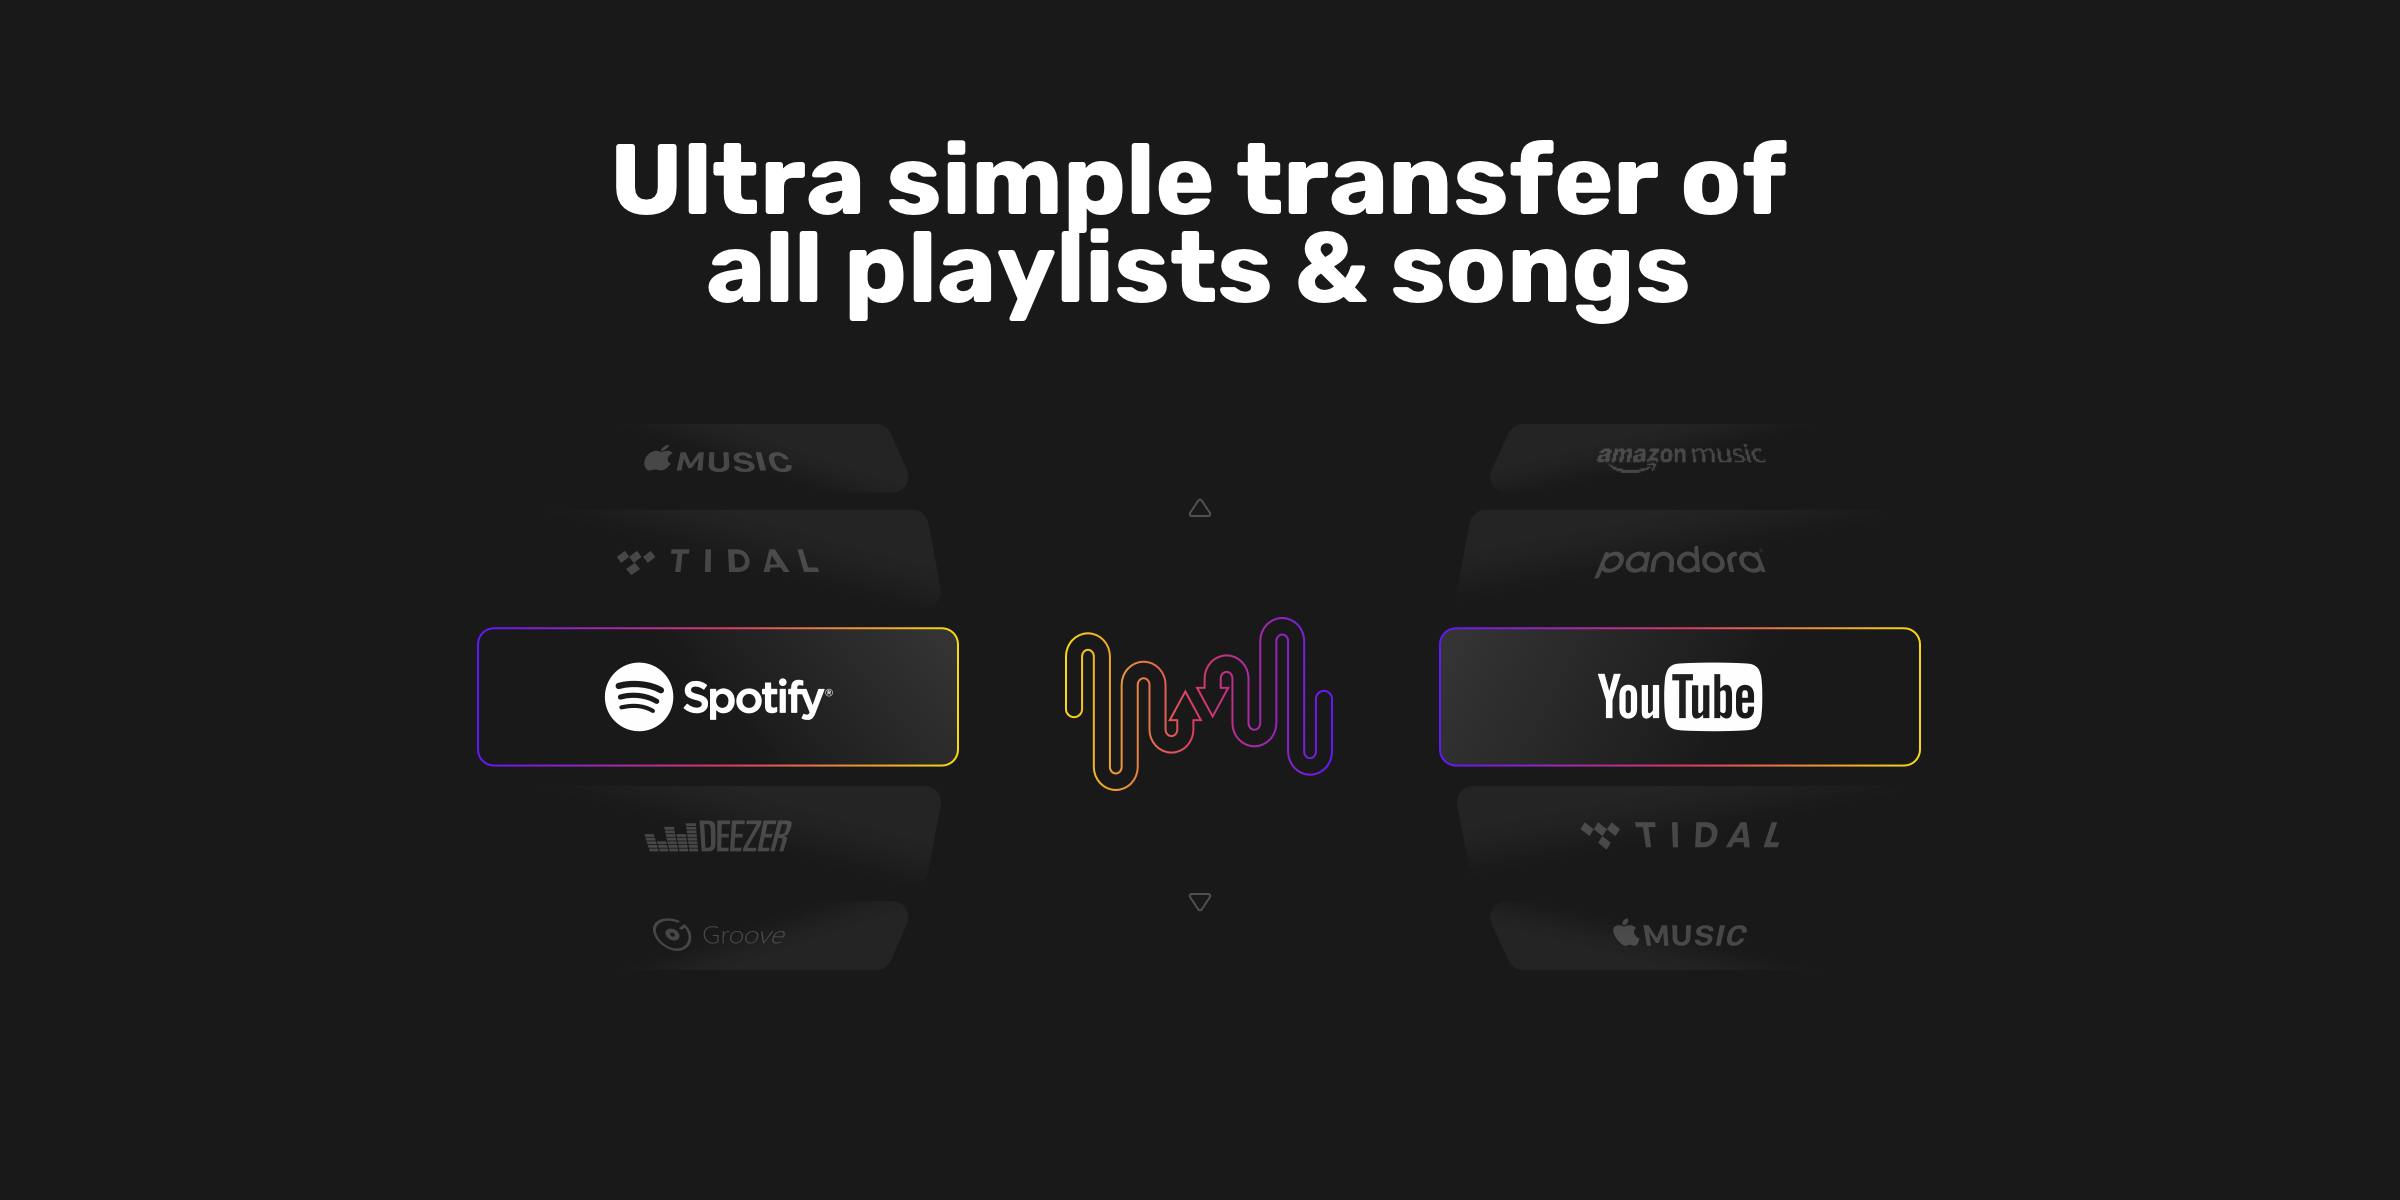 Stream L3XIS! music  Listen to songs, albums, playlists for free